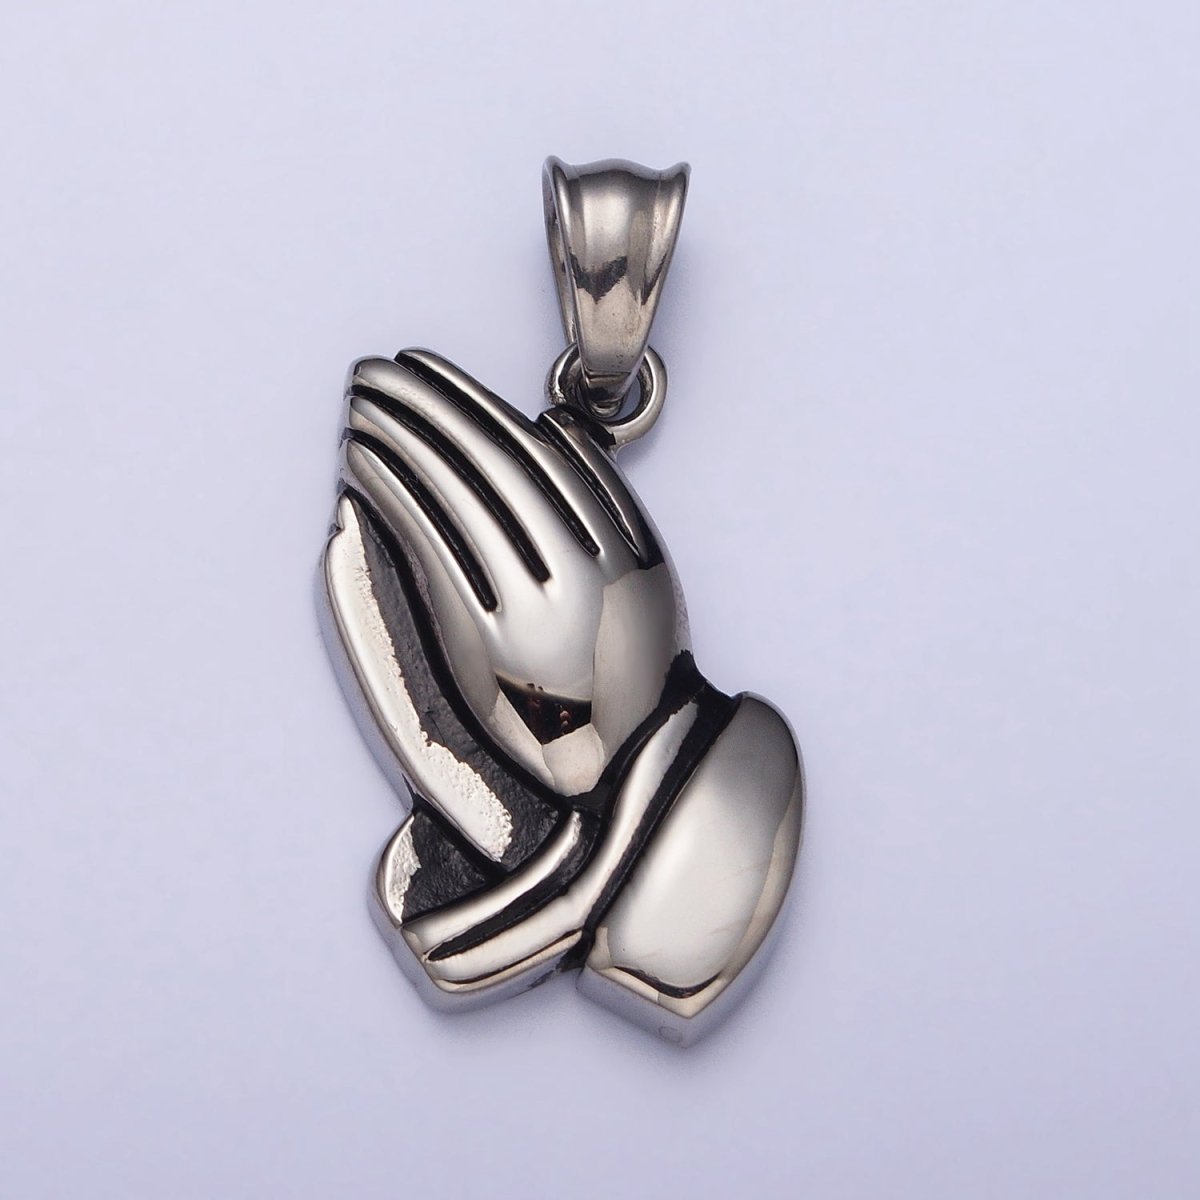 Stainless Steel Religious Prayer Hands Pendant in Gold & Silver P-1146 - DLUXCA